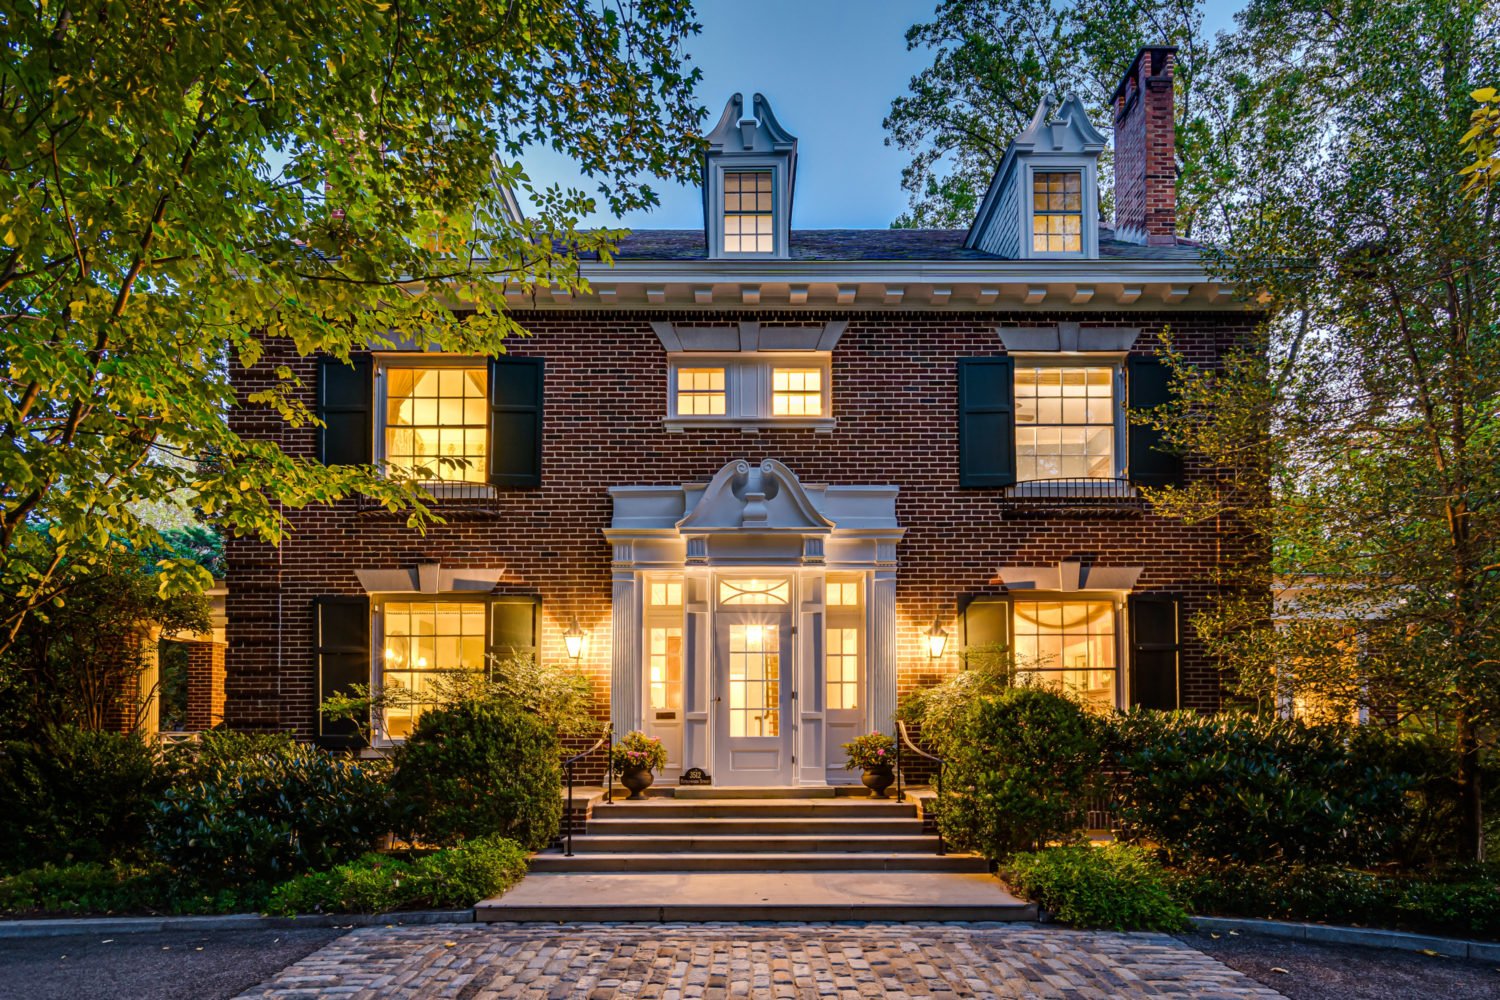 One of The True “Grande Dames” of Chevy Chase, DC Now Available